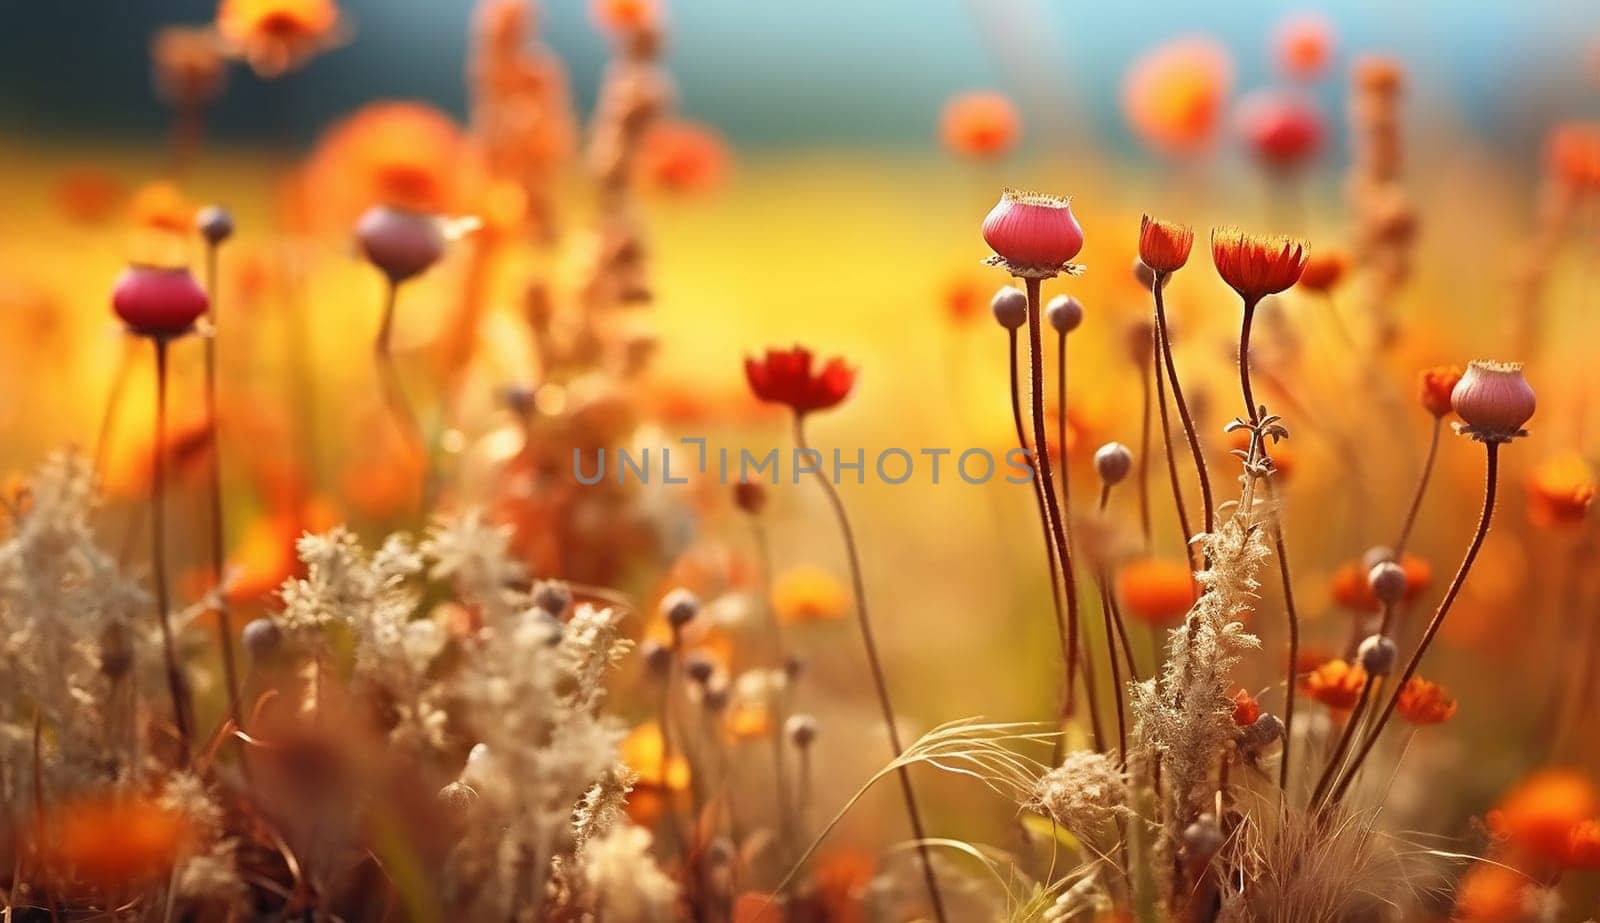 meadow flowers in early sunny fresh morning. Vintage autumn landscape background. colorful beautiful fall flowers by Annebel146